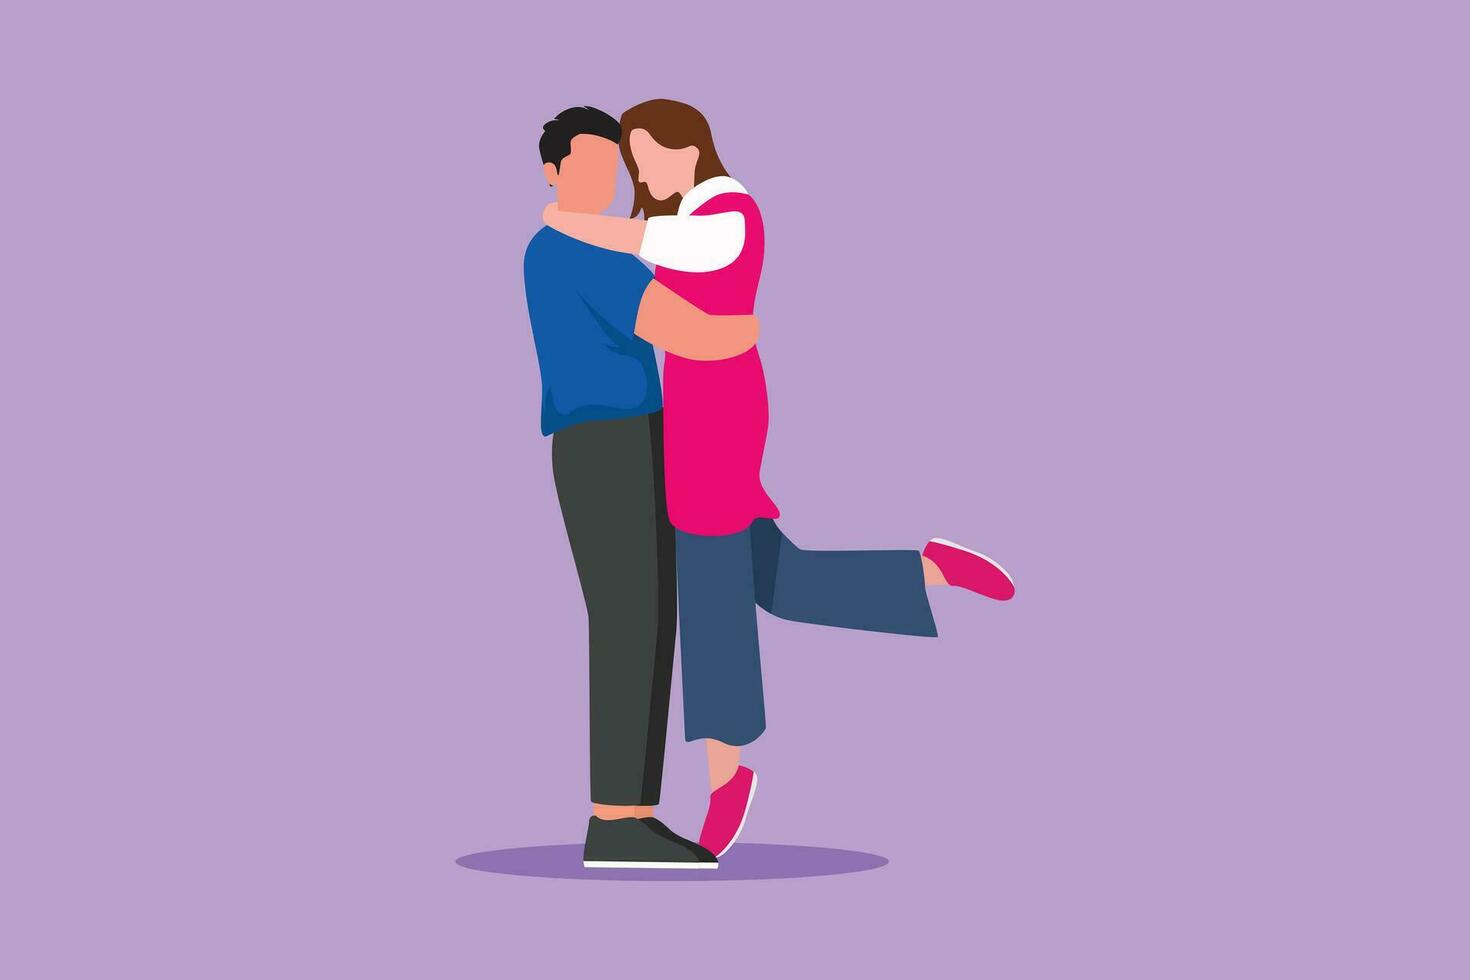 Character flat drawing romantic couple in love kissing and hugging. Happy man carrying pretty woman celebrating wedding anniversary. Cute couple hugging each other. Cartoon design vector illustration